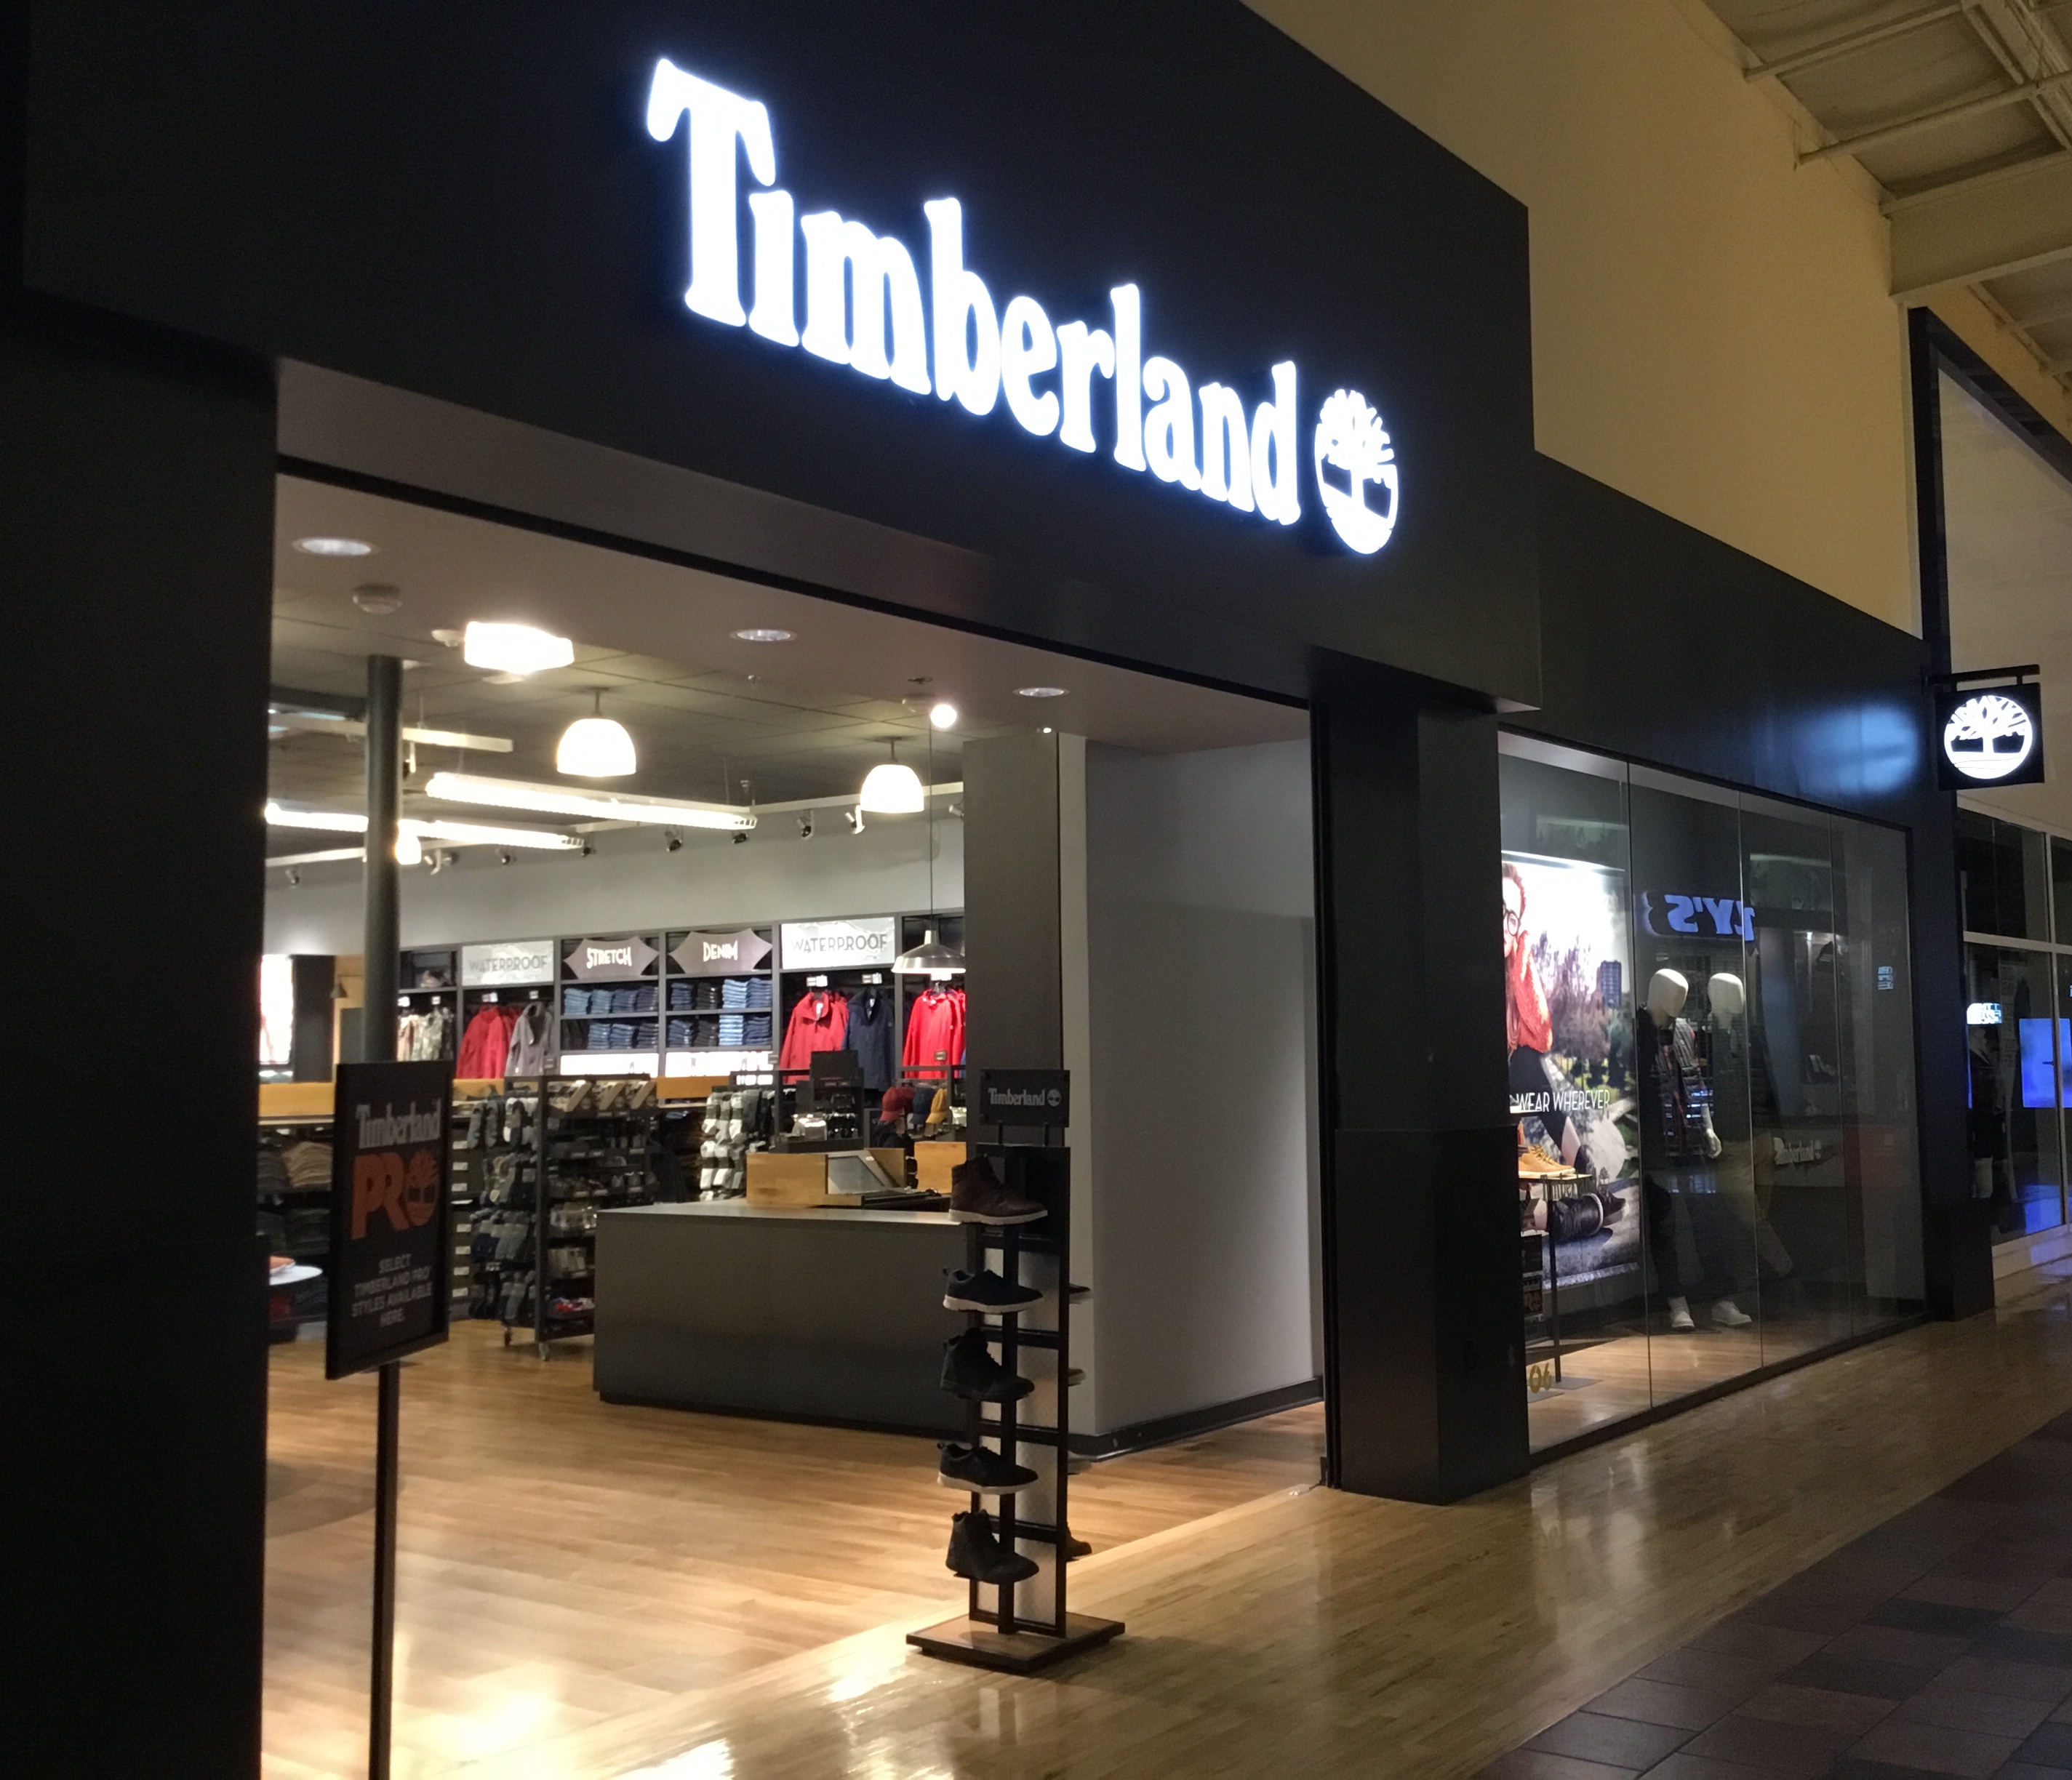 Timberland - Boots, Shoes, Clothing \u0026 Accessories in Woodbridge, VA